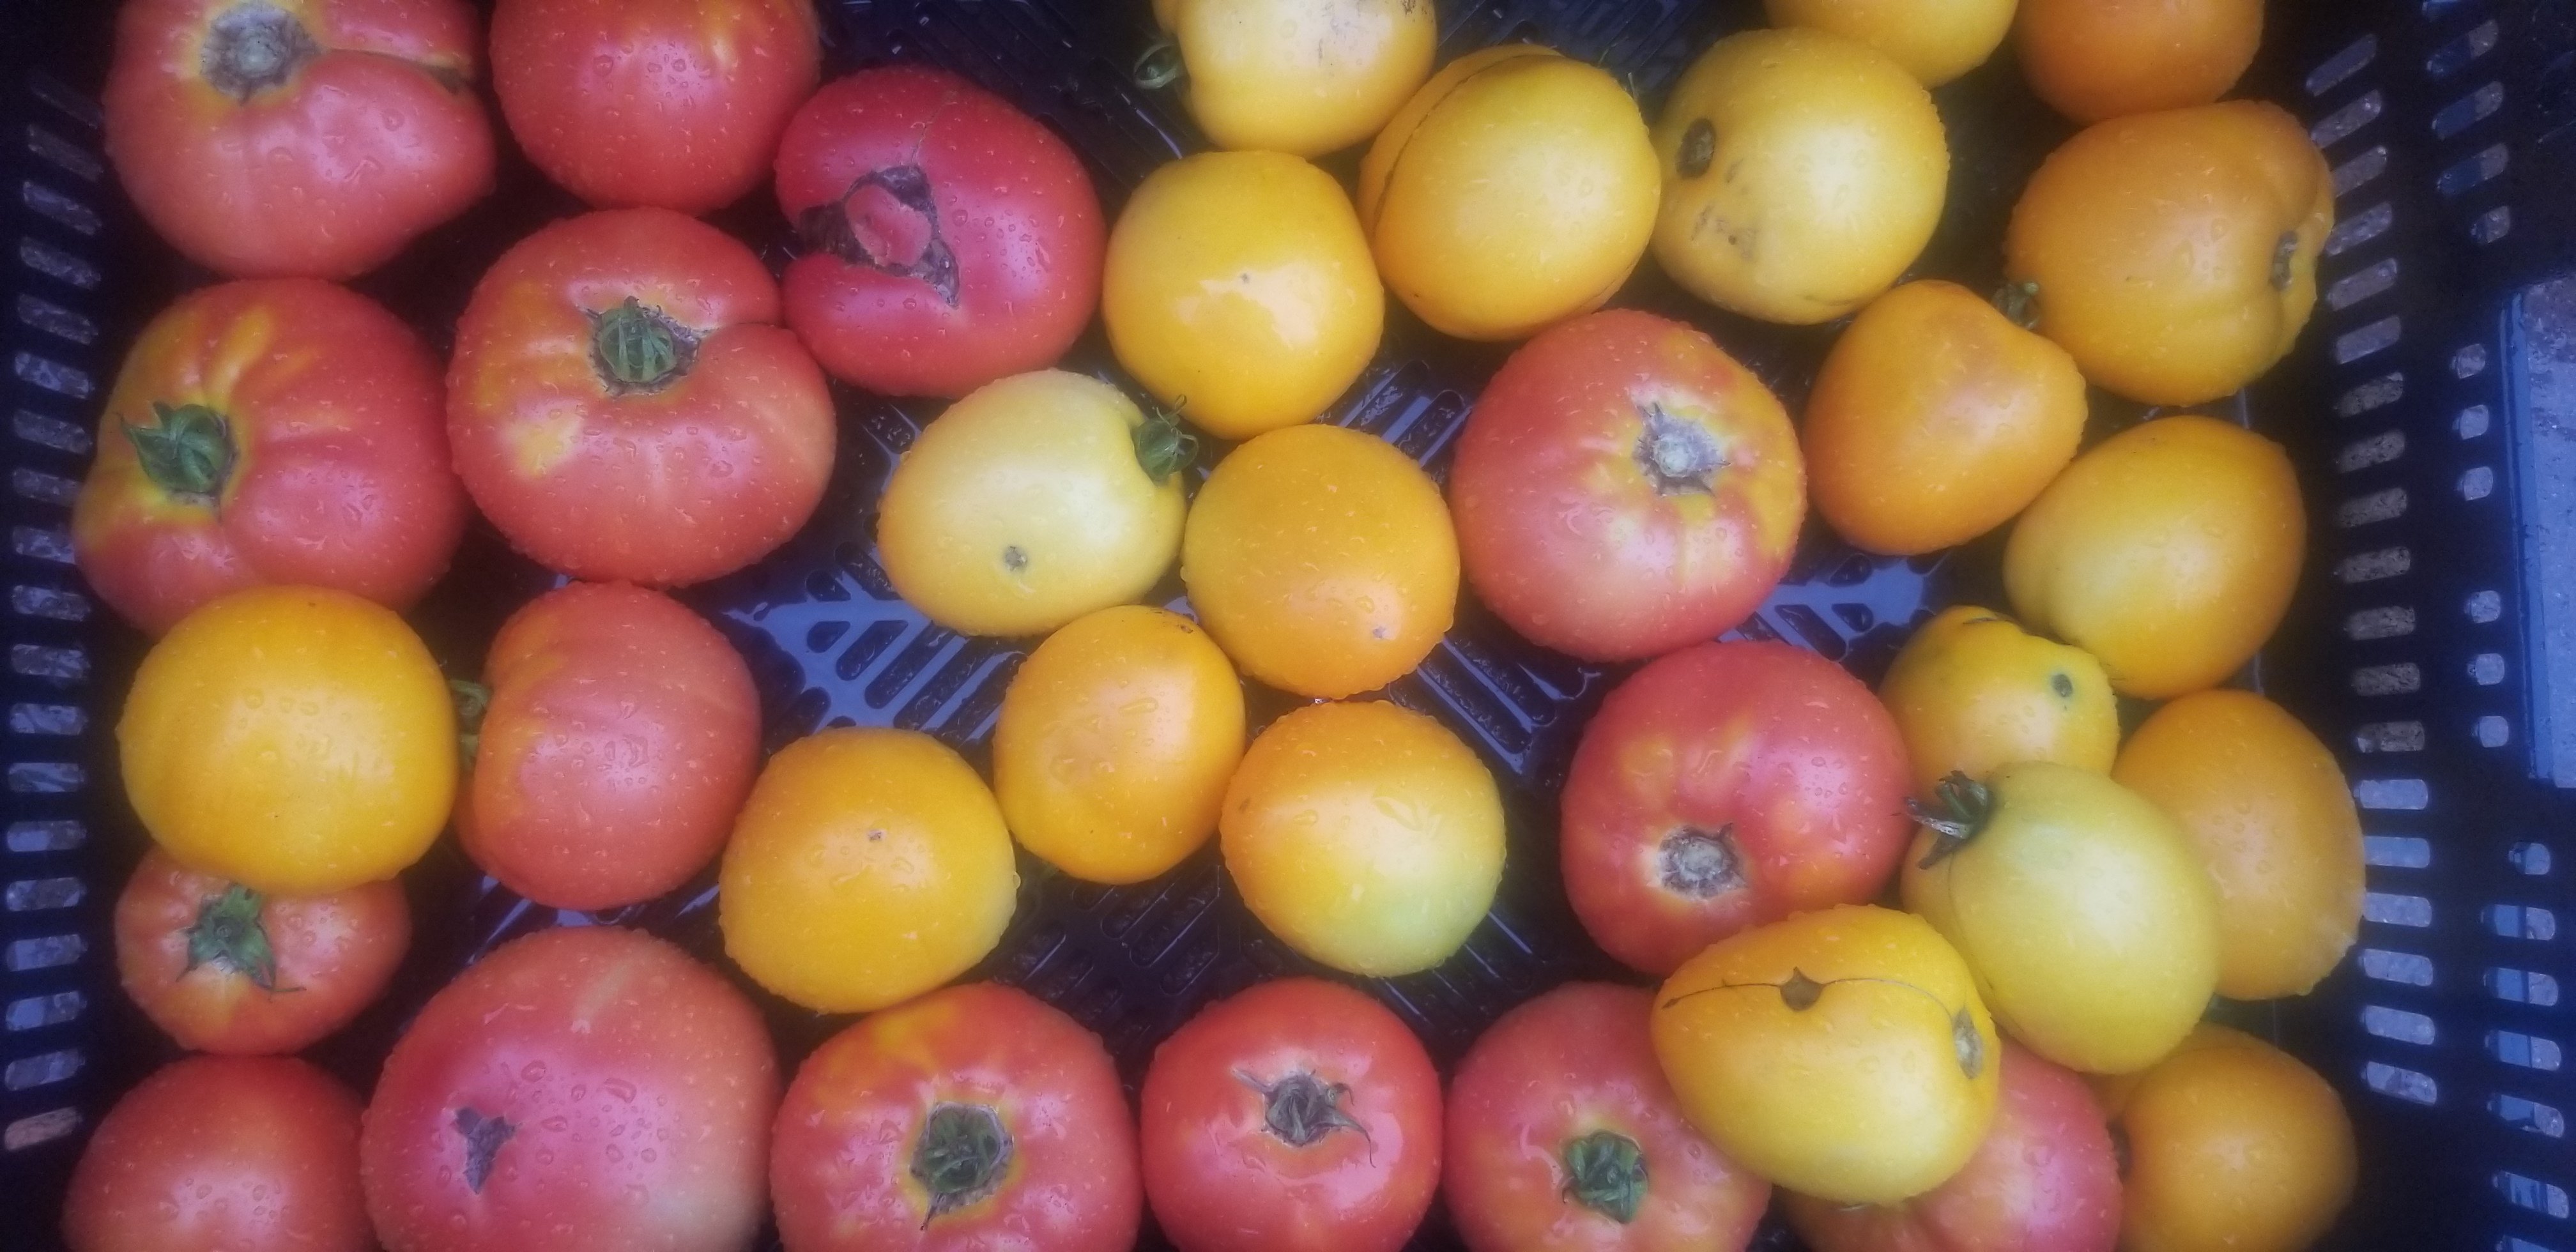 Farm Happenings for the Week of August 27, 2019